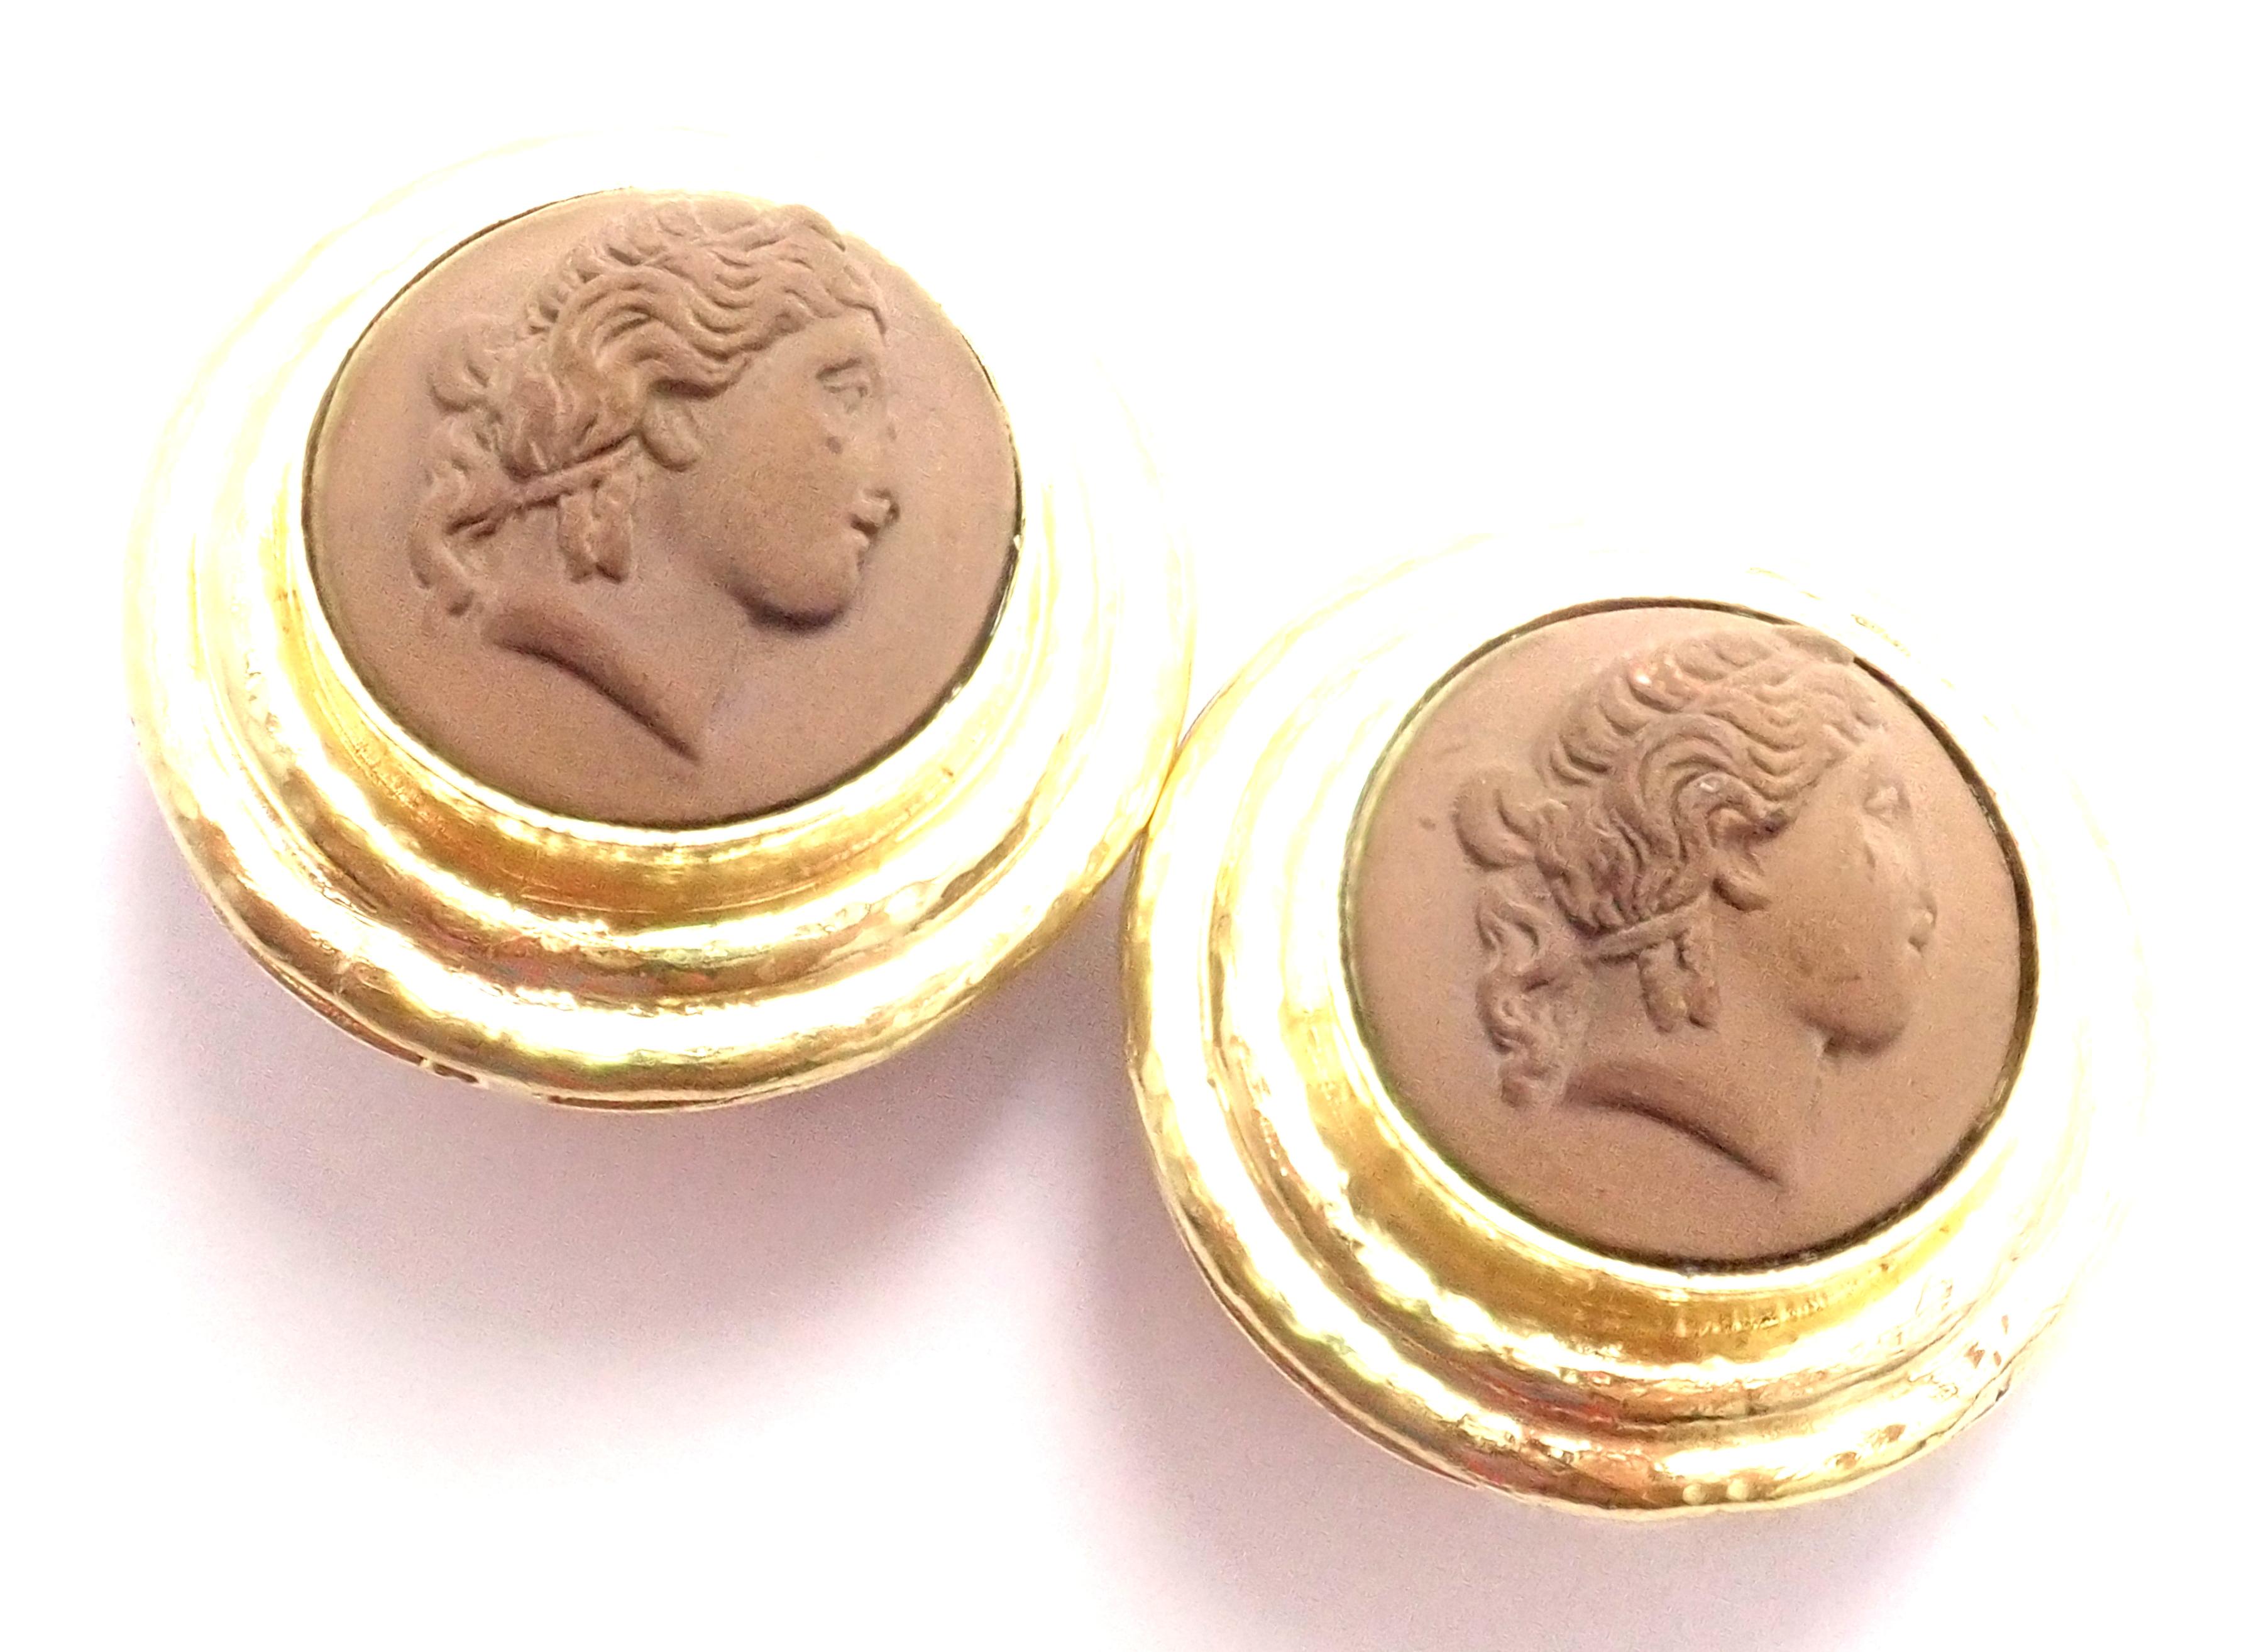 18k Yellow Gold Lava Cameo Earrings by Elizabeth Locke. 
With 2 lava brown stones
Collapsible posts with omega backs. 
Details:
Weight: 23.9 grams
Measurements: 28mm
Stamped Hallmarks: 18k Hallmark for Elizabeth Locke 
*Free Shipping within the